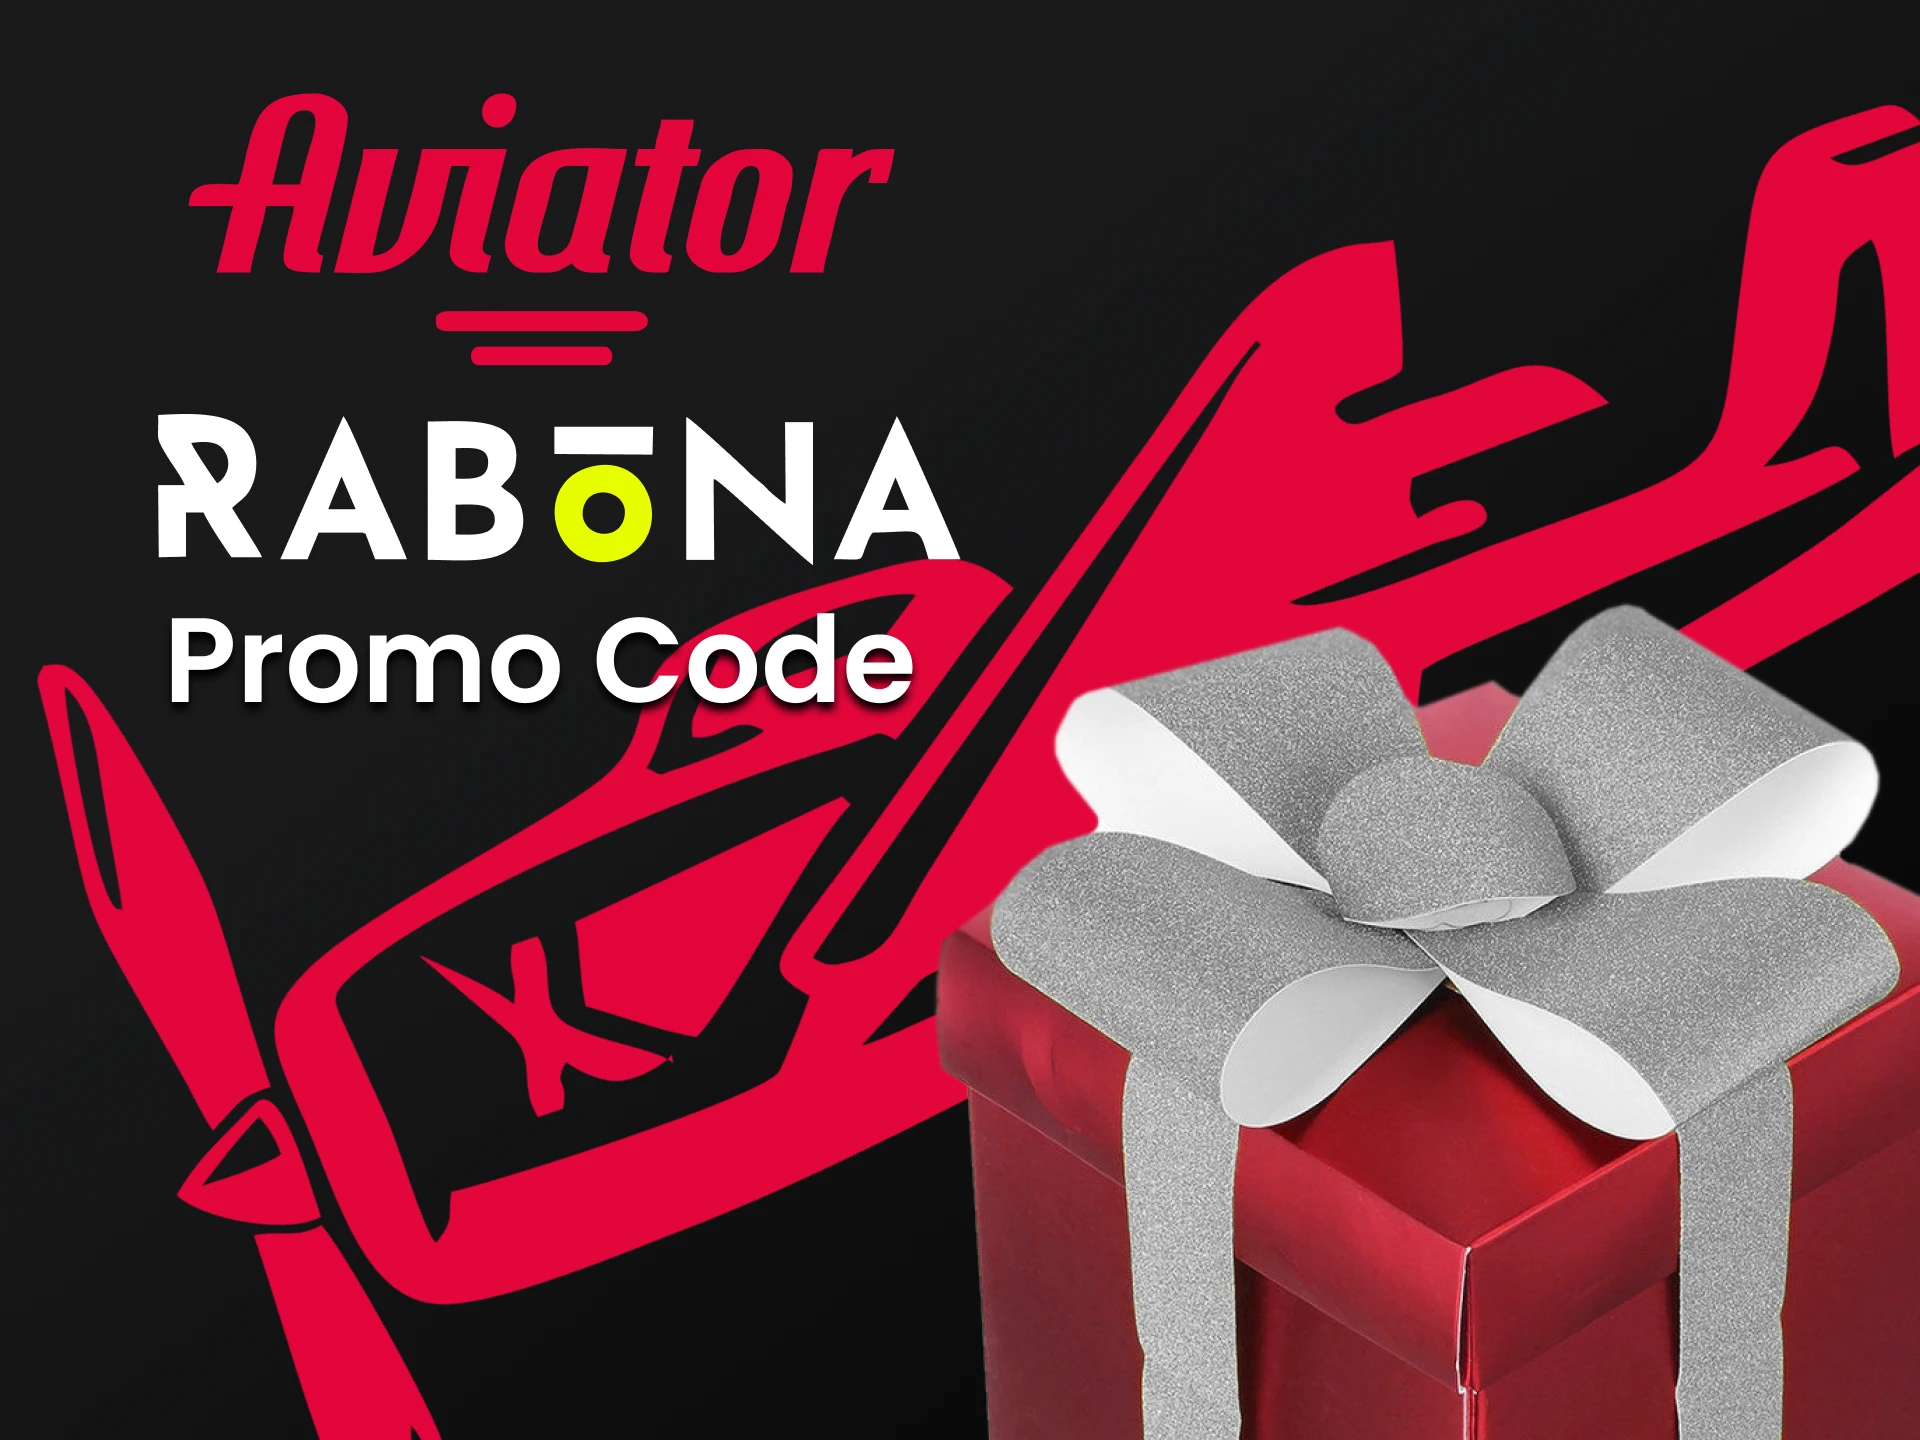 Enter the promo code from Rabona for the Aviator.